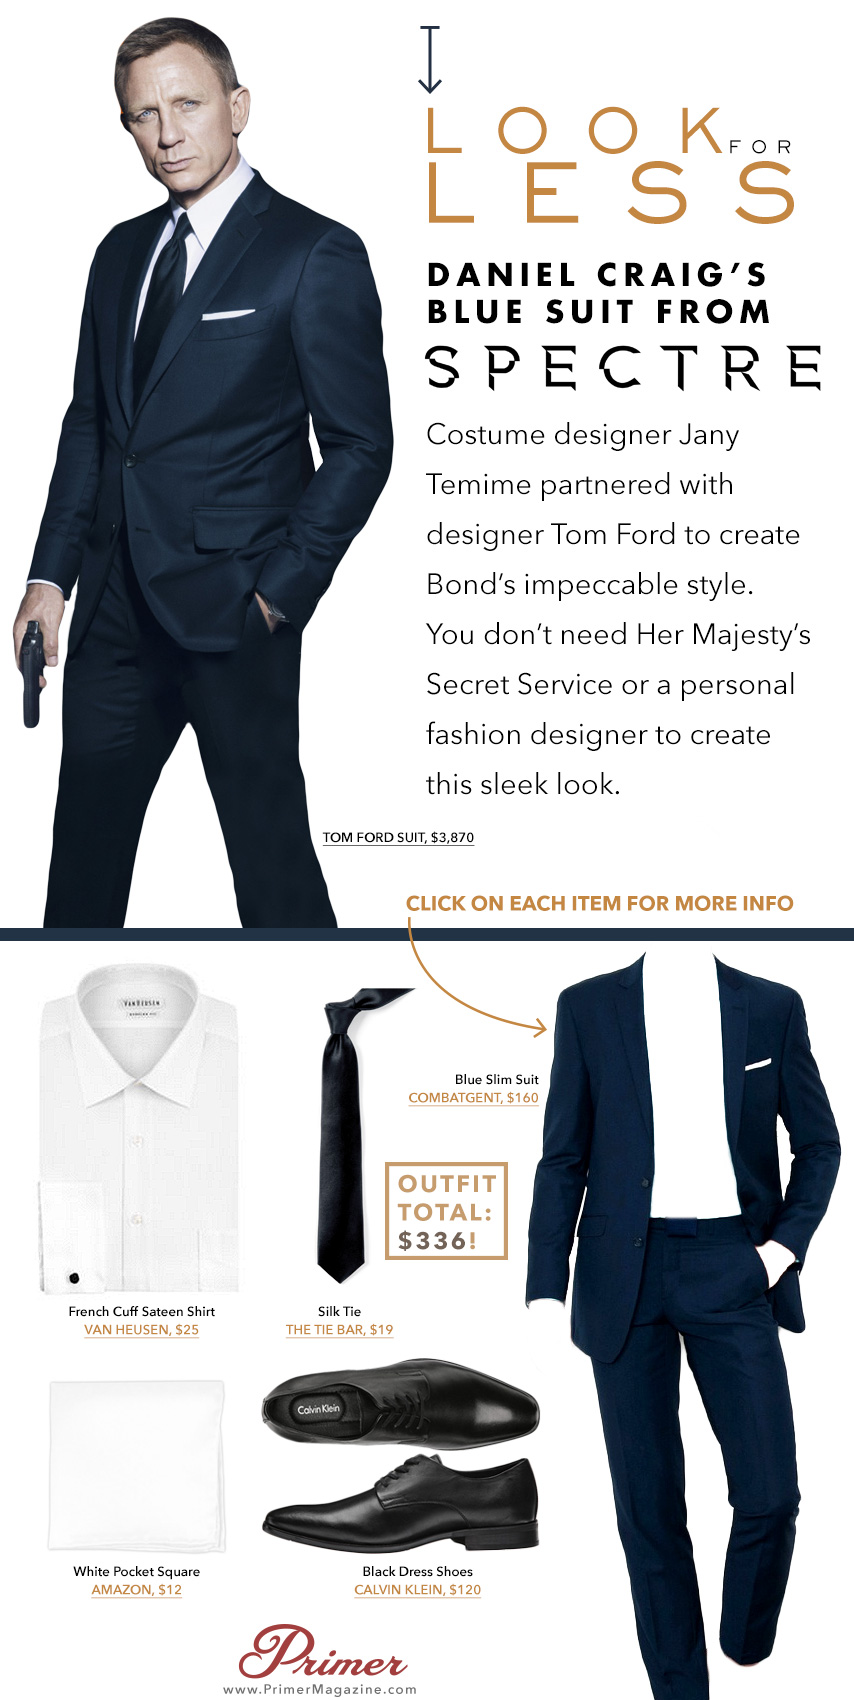 Daniel Craig wearing a navy suit and tie in spectre with affordable alternatives